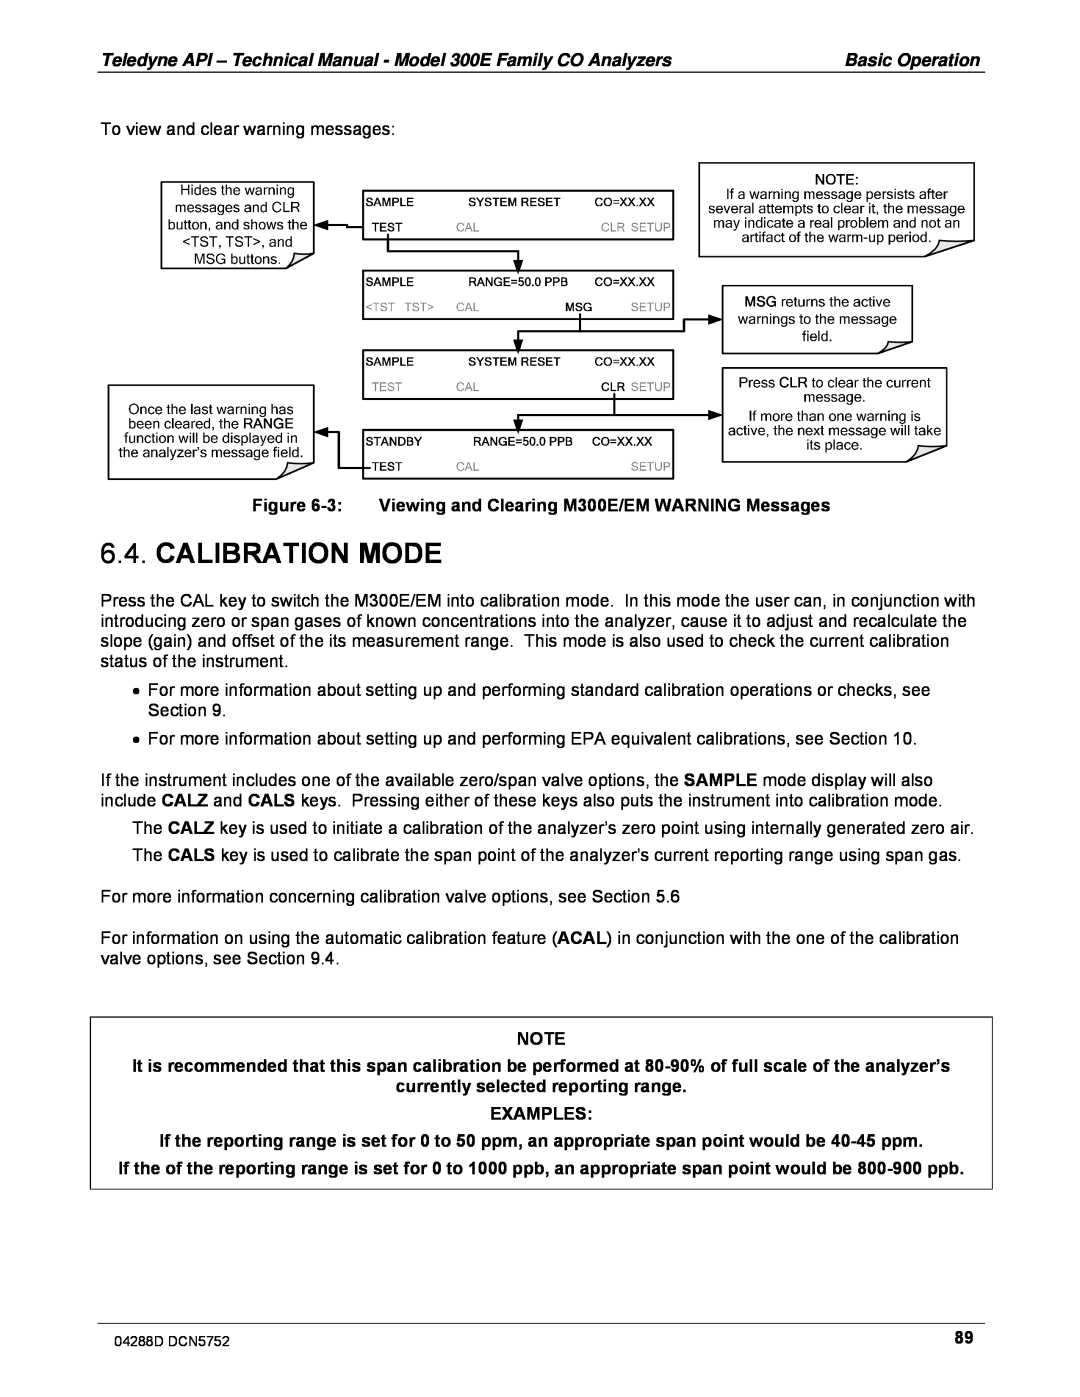 Teledyne M300EM operation manual Calibration Mode, currently selected reporting range EXAMPLES 